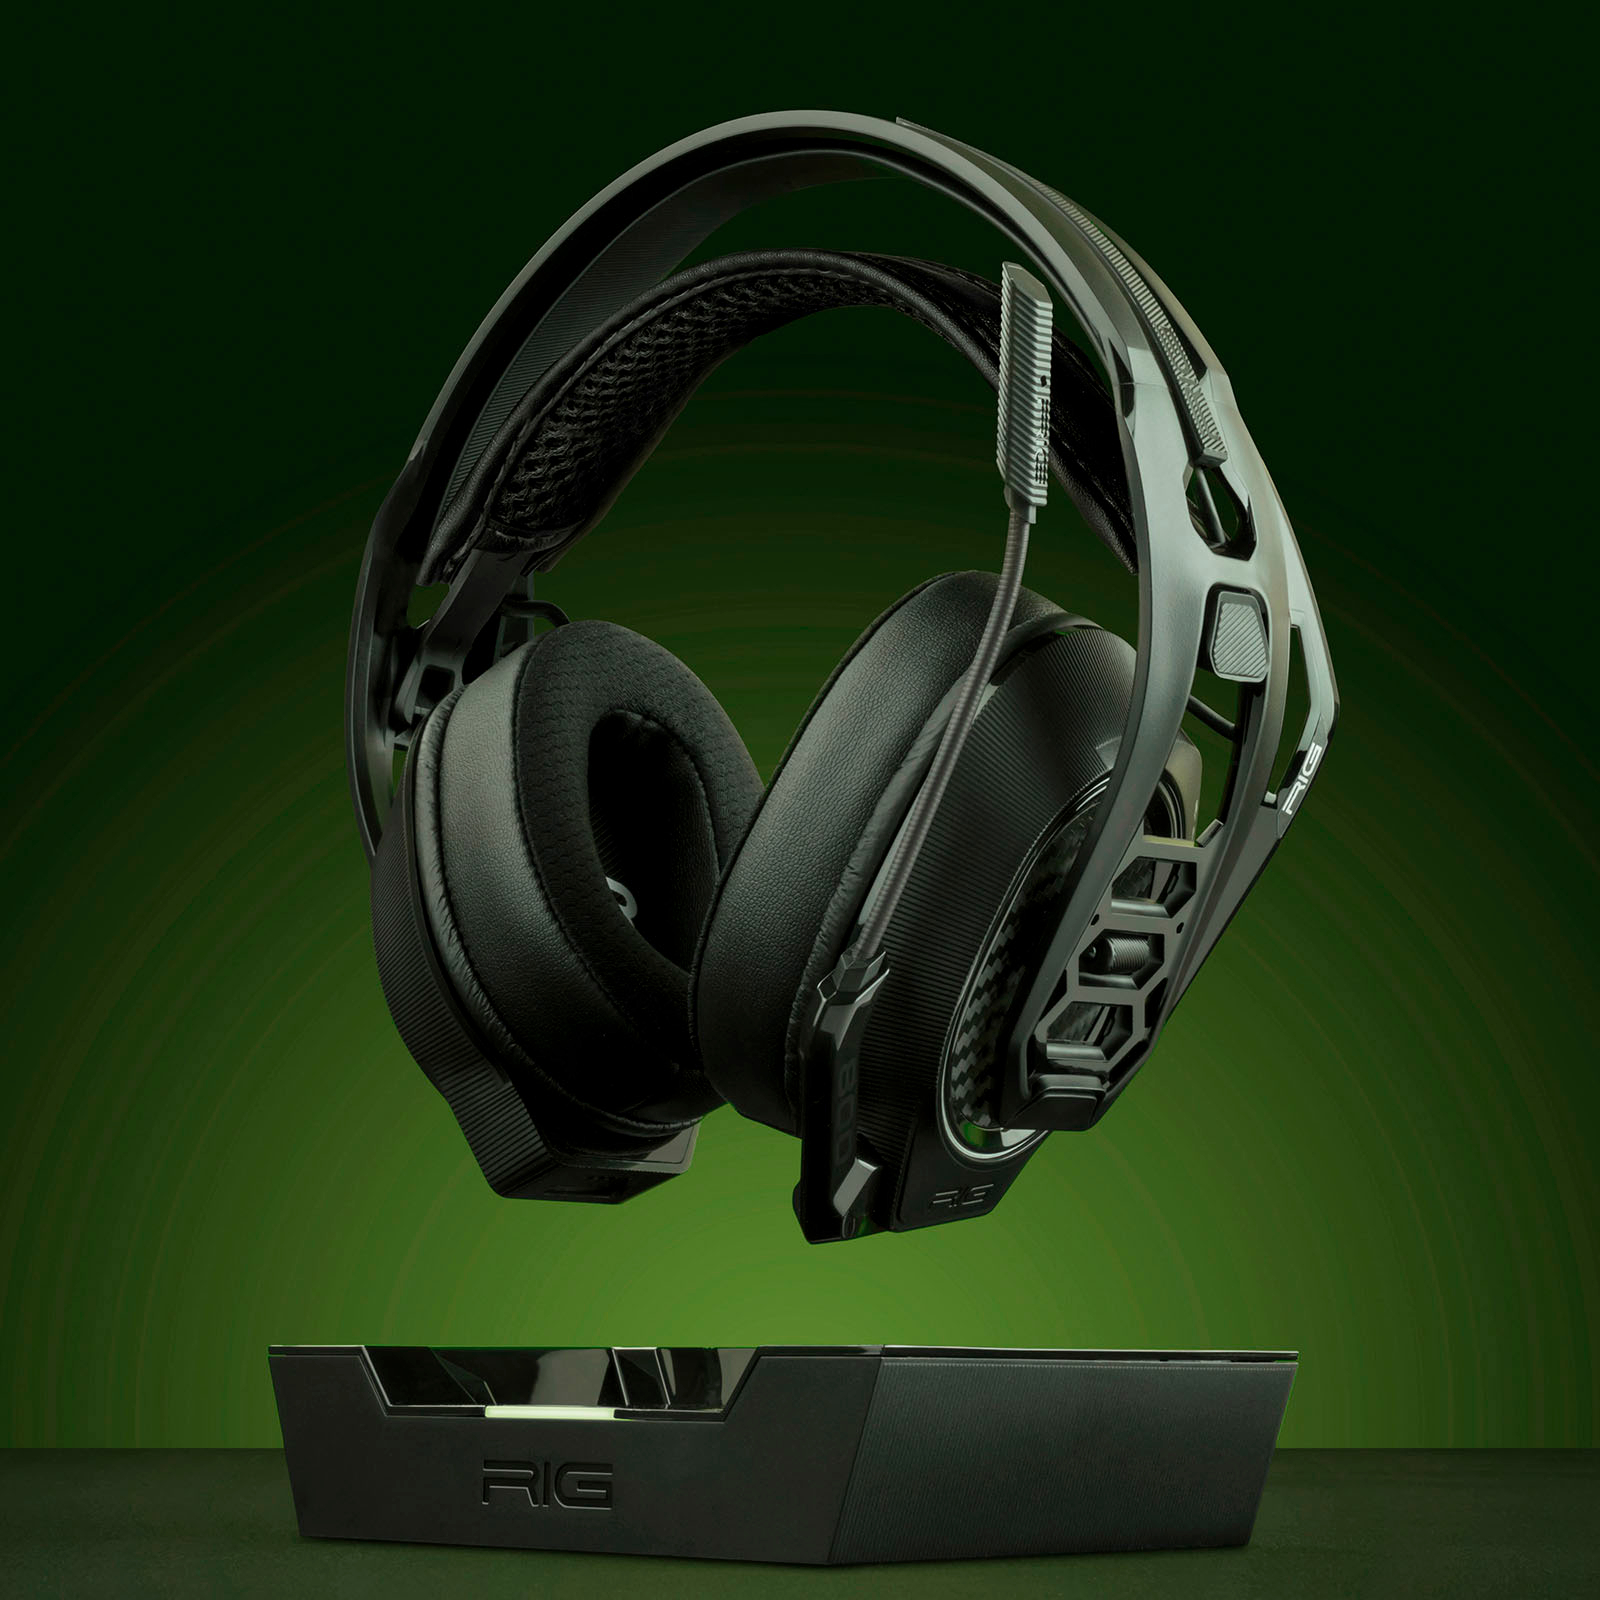 RIG 800 Pro HX for Black Wireless 10-1172-01 Buy Headset - Best Gaming Xbox